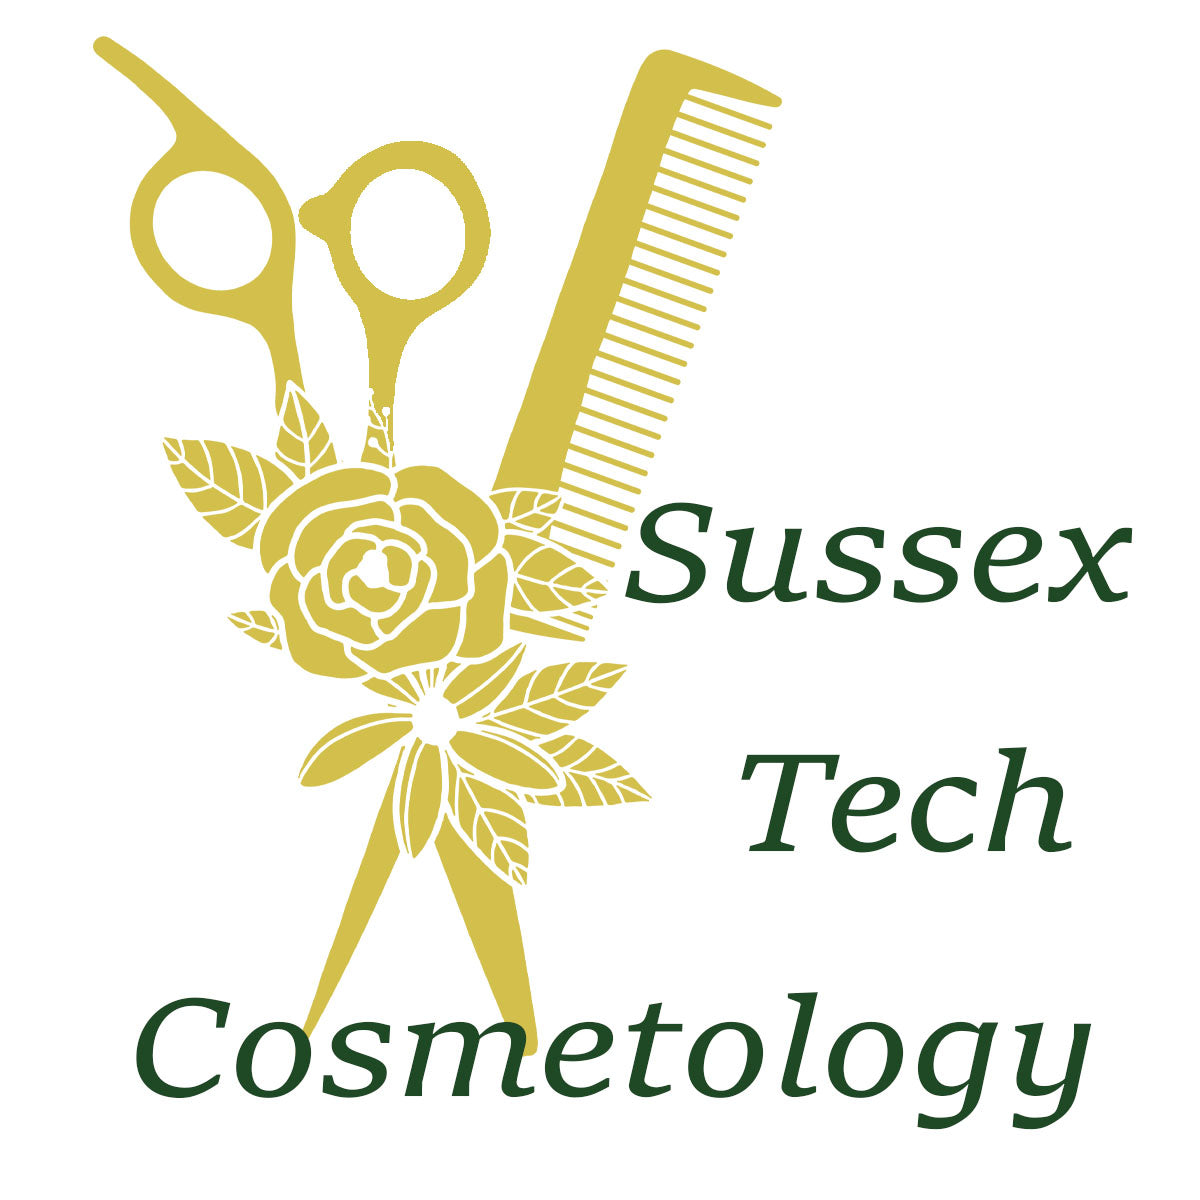 1 Sussex Tech Cosmetology